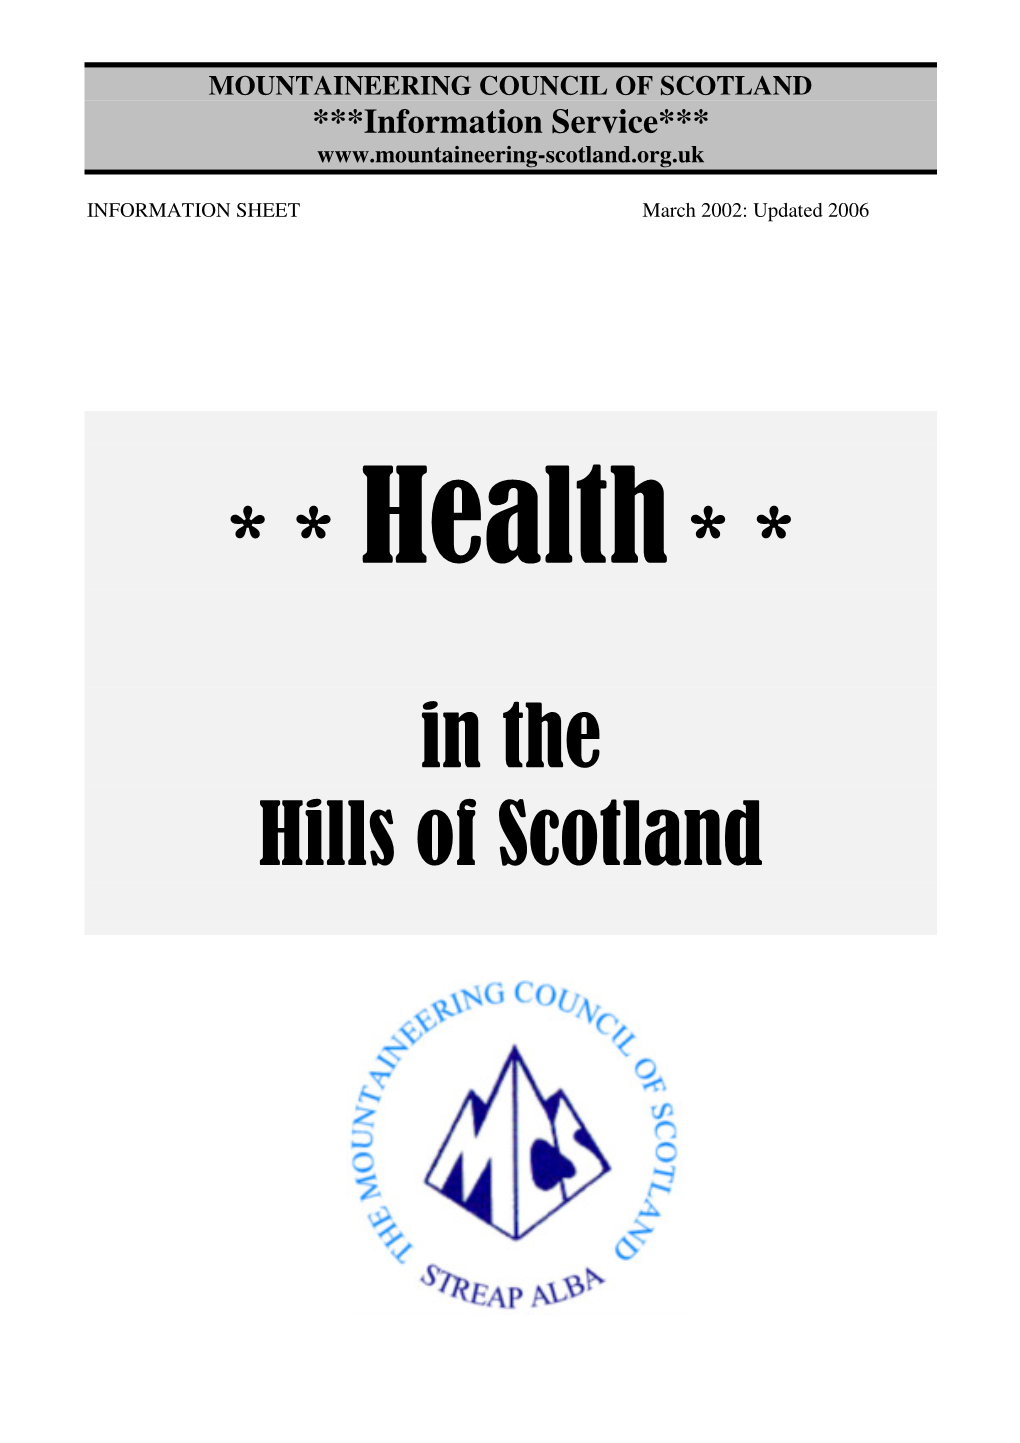 Health in the Hills of Scotland